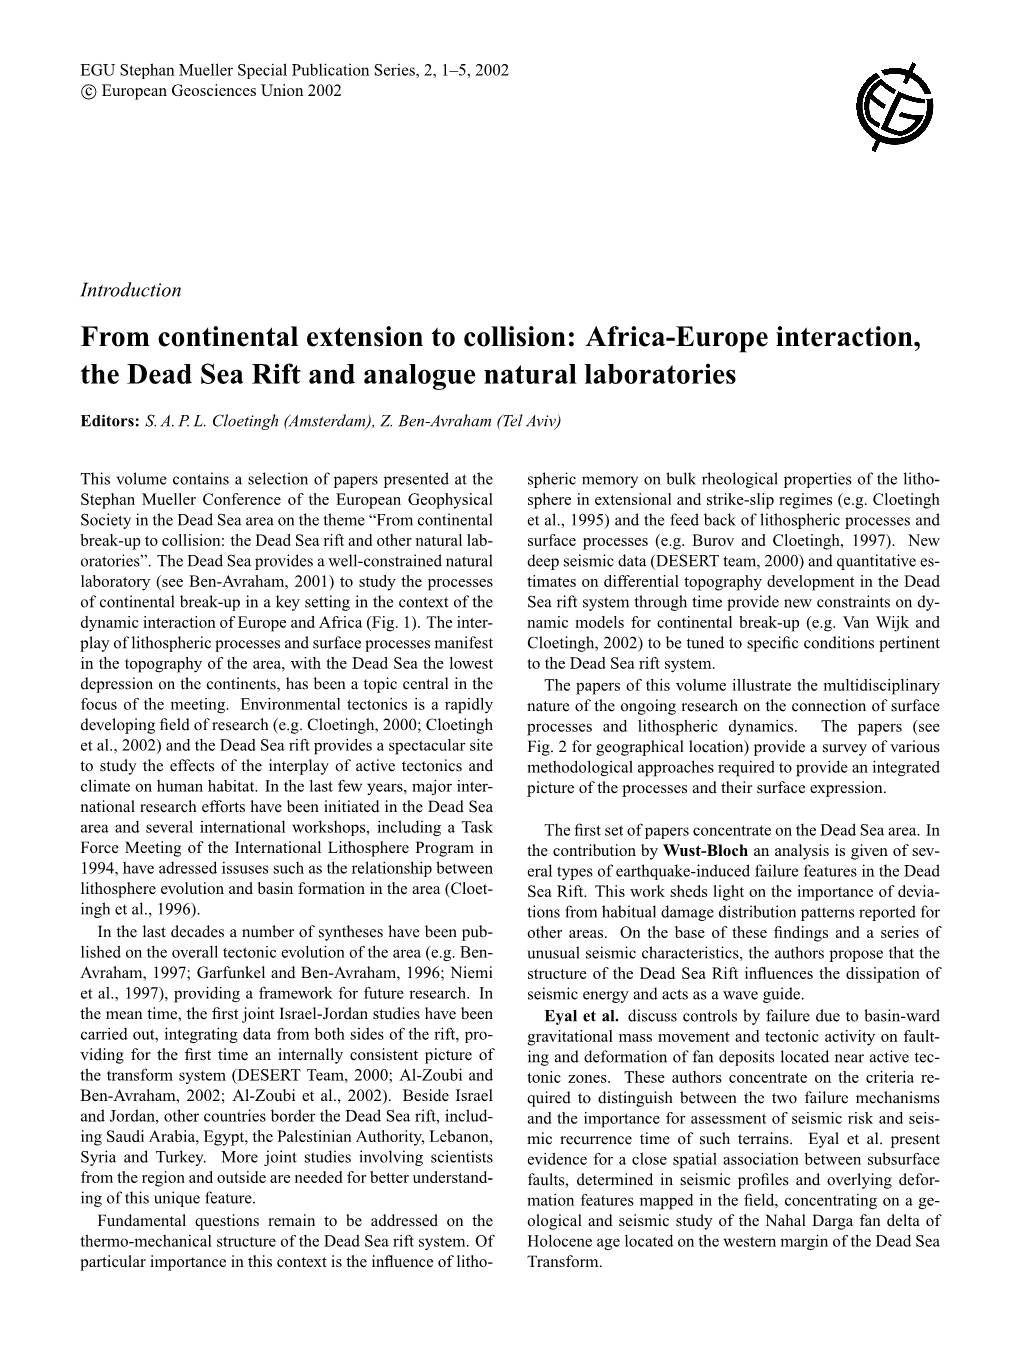 From Continental Extension to Collision: Africa-Europe Interaction, the Dead Sea Rift and Analogue Natural Laboratories